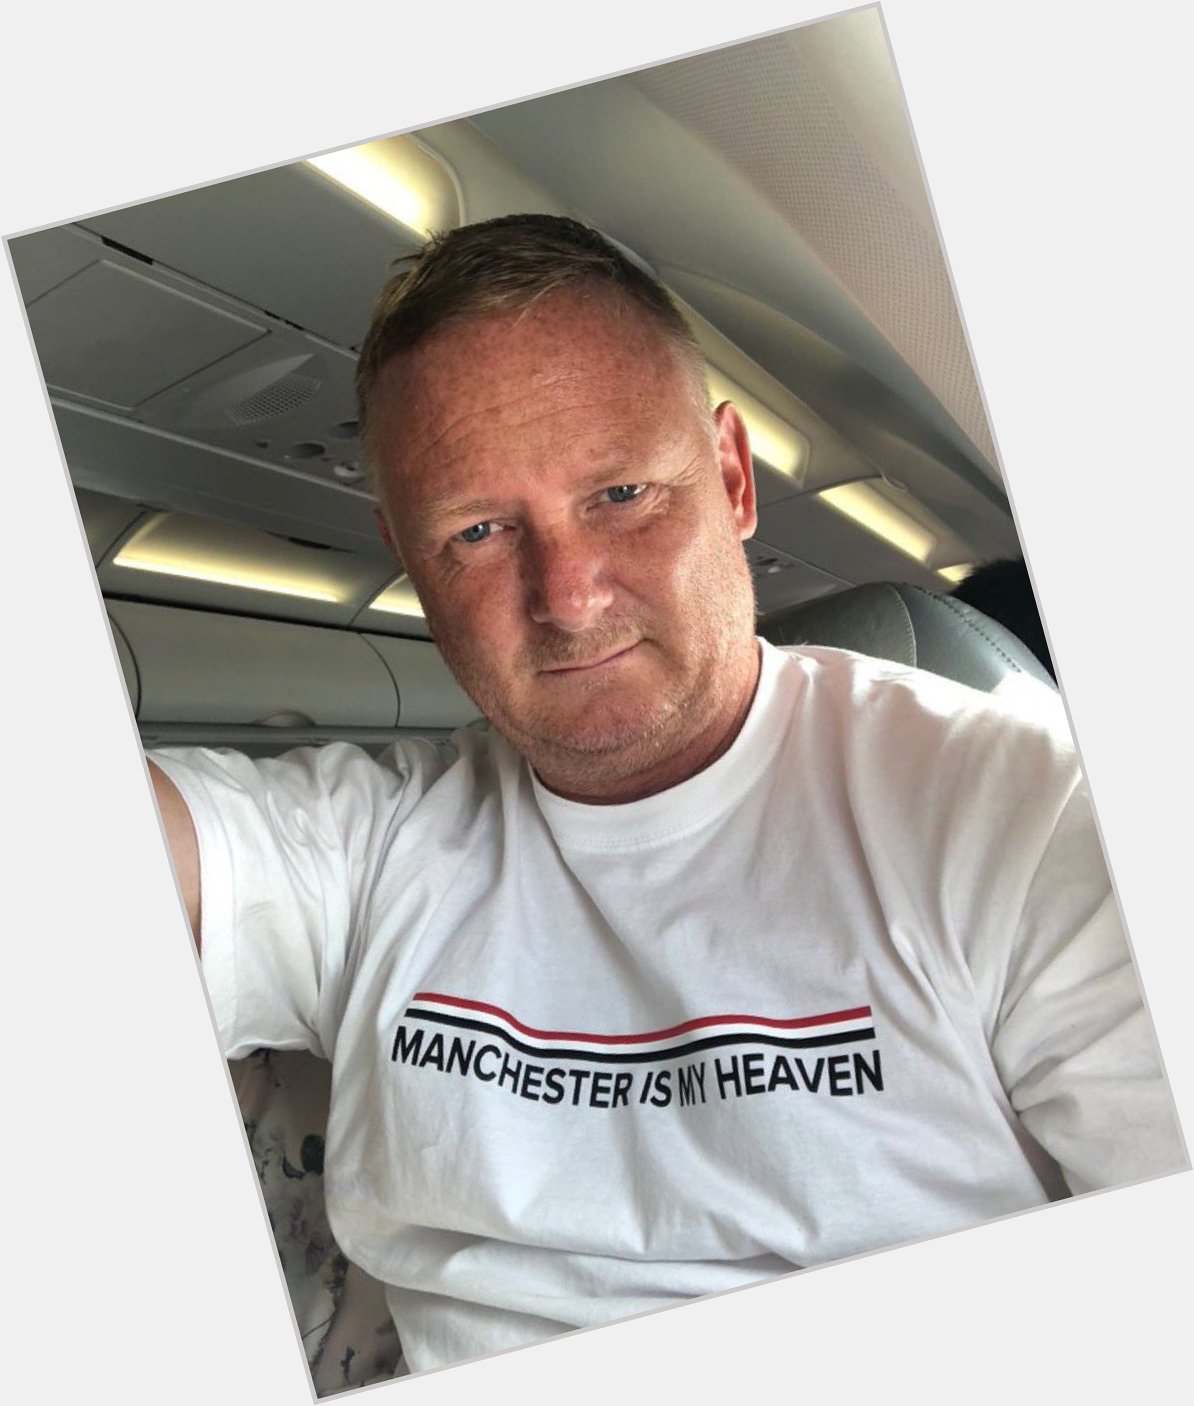 David May, Superstar 
Got a cool T-shirt 
From UTFR Happy Birthday 